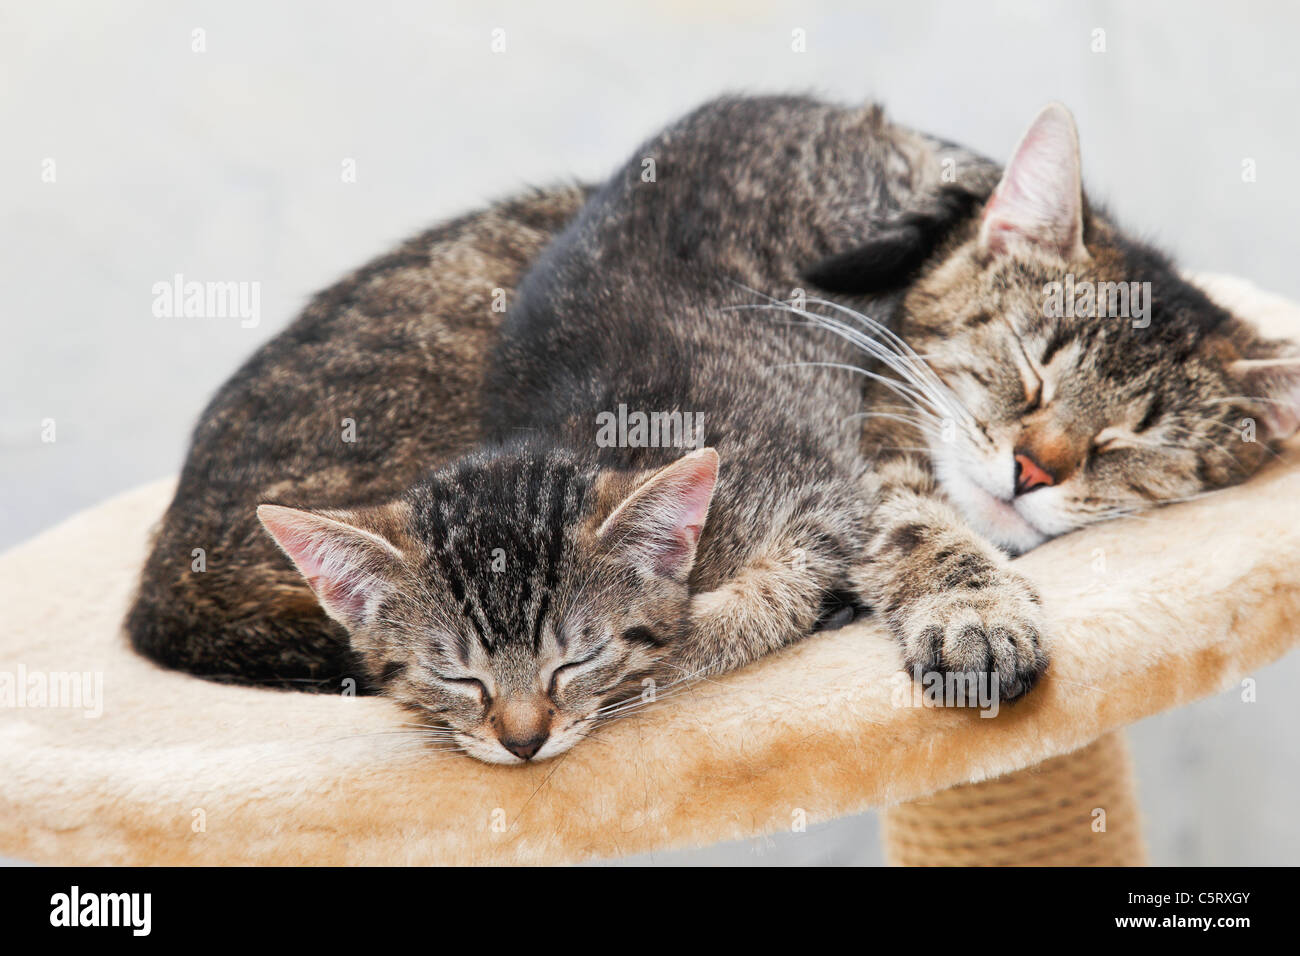 Domestic cats, cat and kitten sleeping together Stock Photo